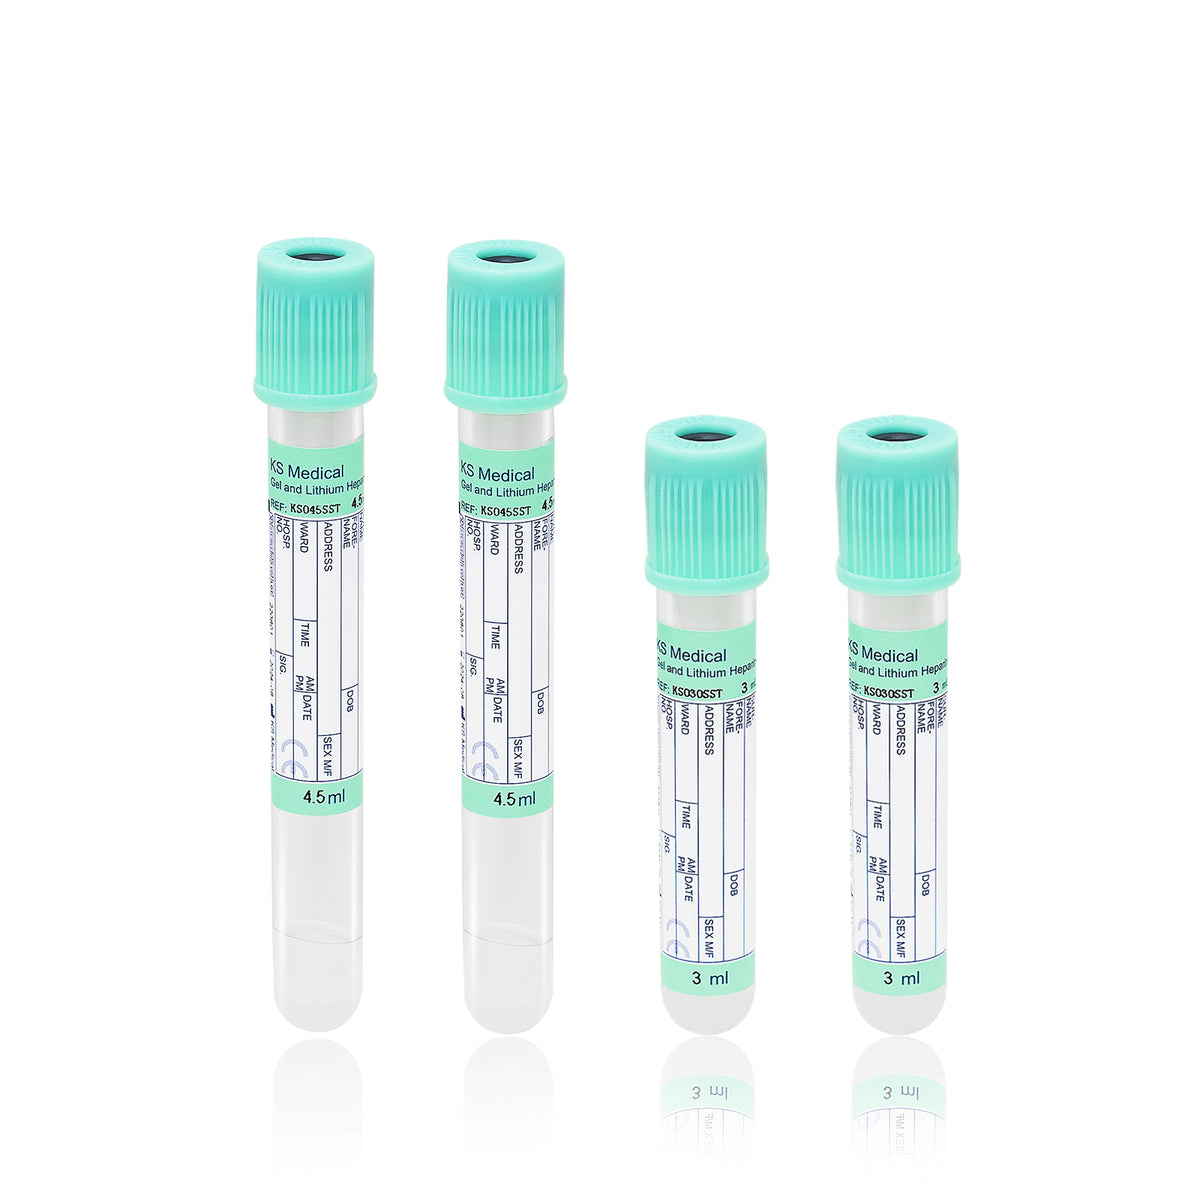 Carestainer™ Vacuum Collection Tube Heparinized Tubes with Separating Gel for Plasma Analysis